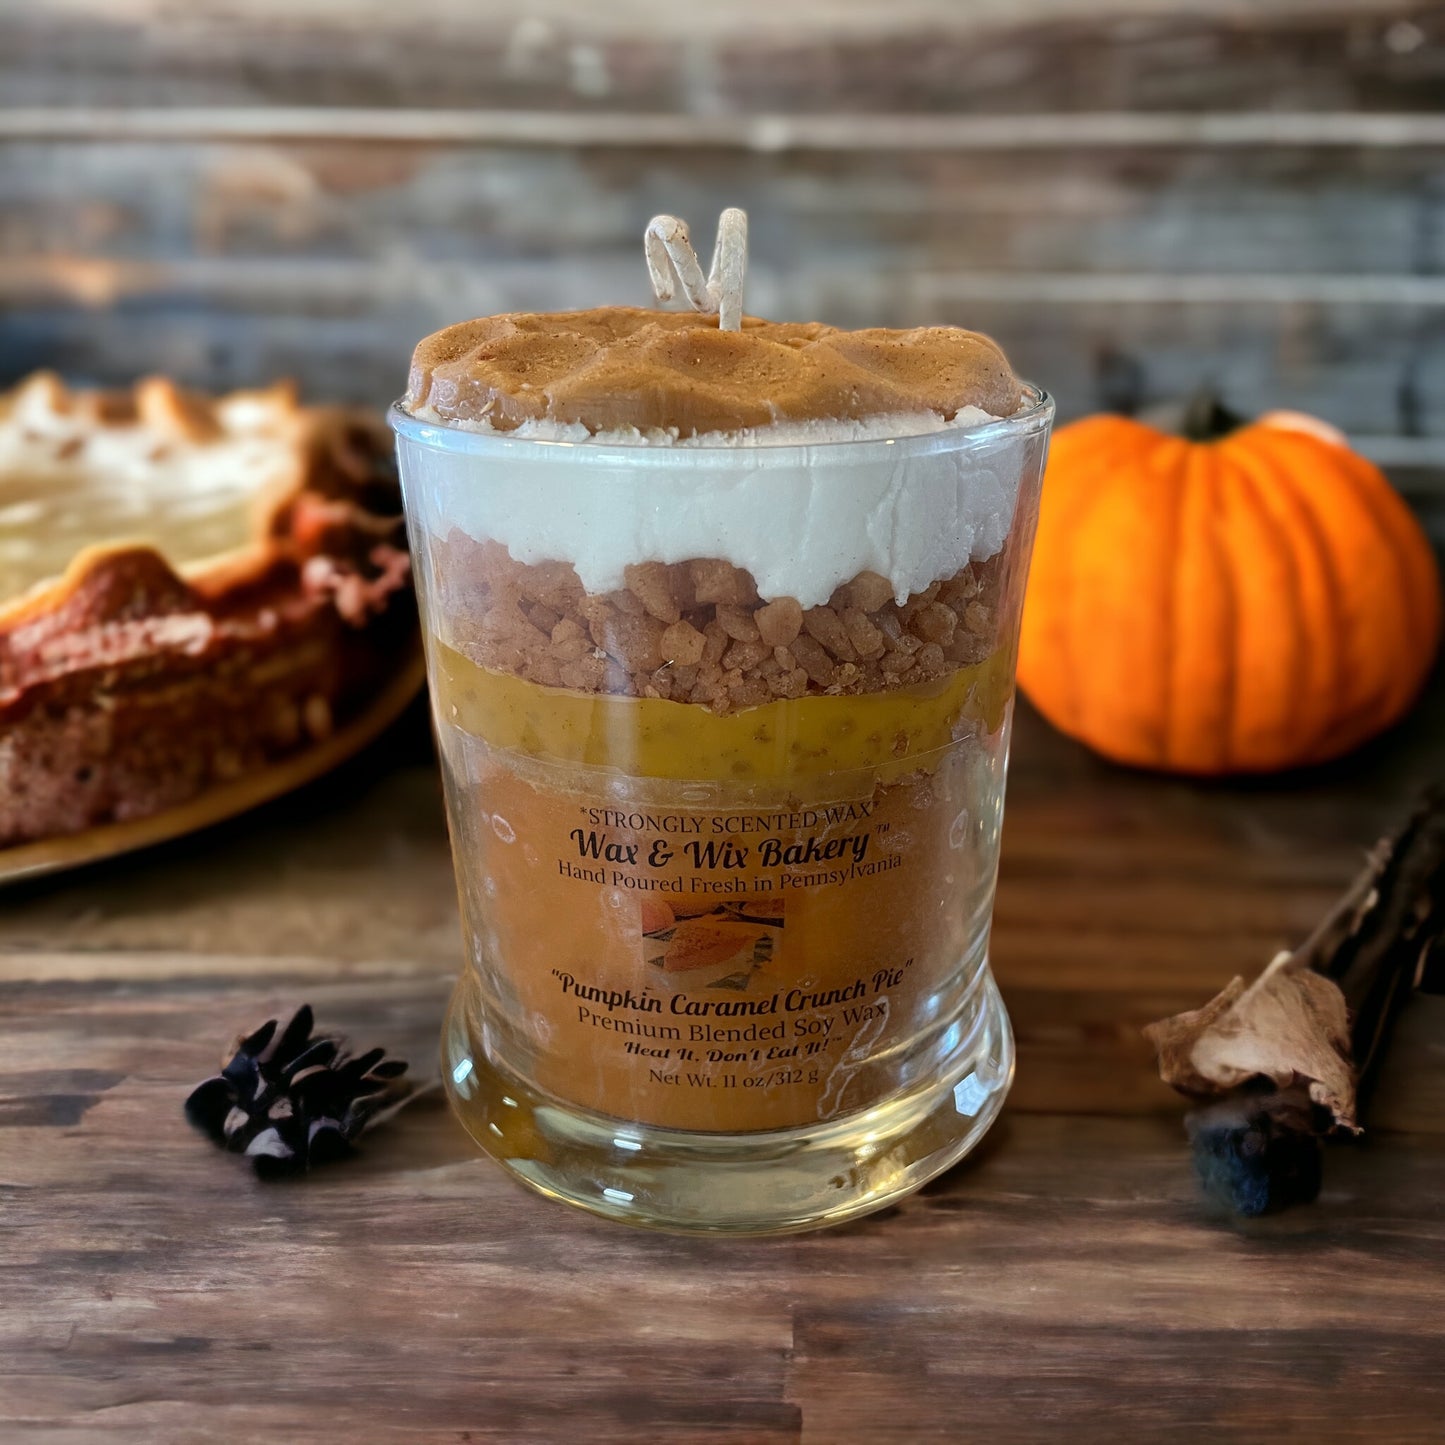 Pumpkin Caramel Crunch Pie Candle 11oz. Soy Candle/Strong Scented Candle/Pumpkin/Gift Box/Gift Bag/Holiday Candle/Winter Candle/Fall Candle.